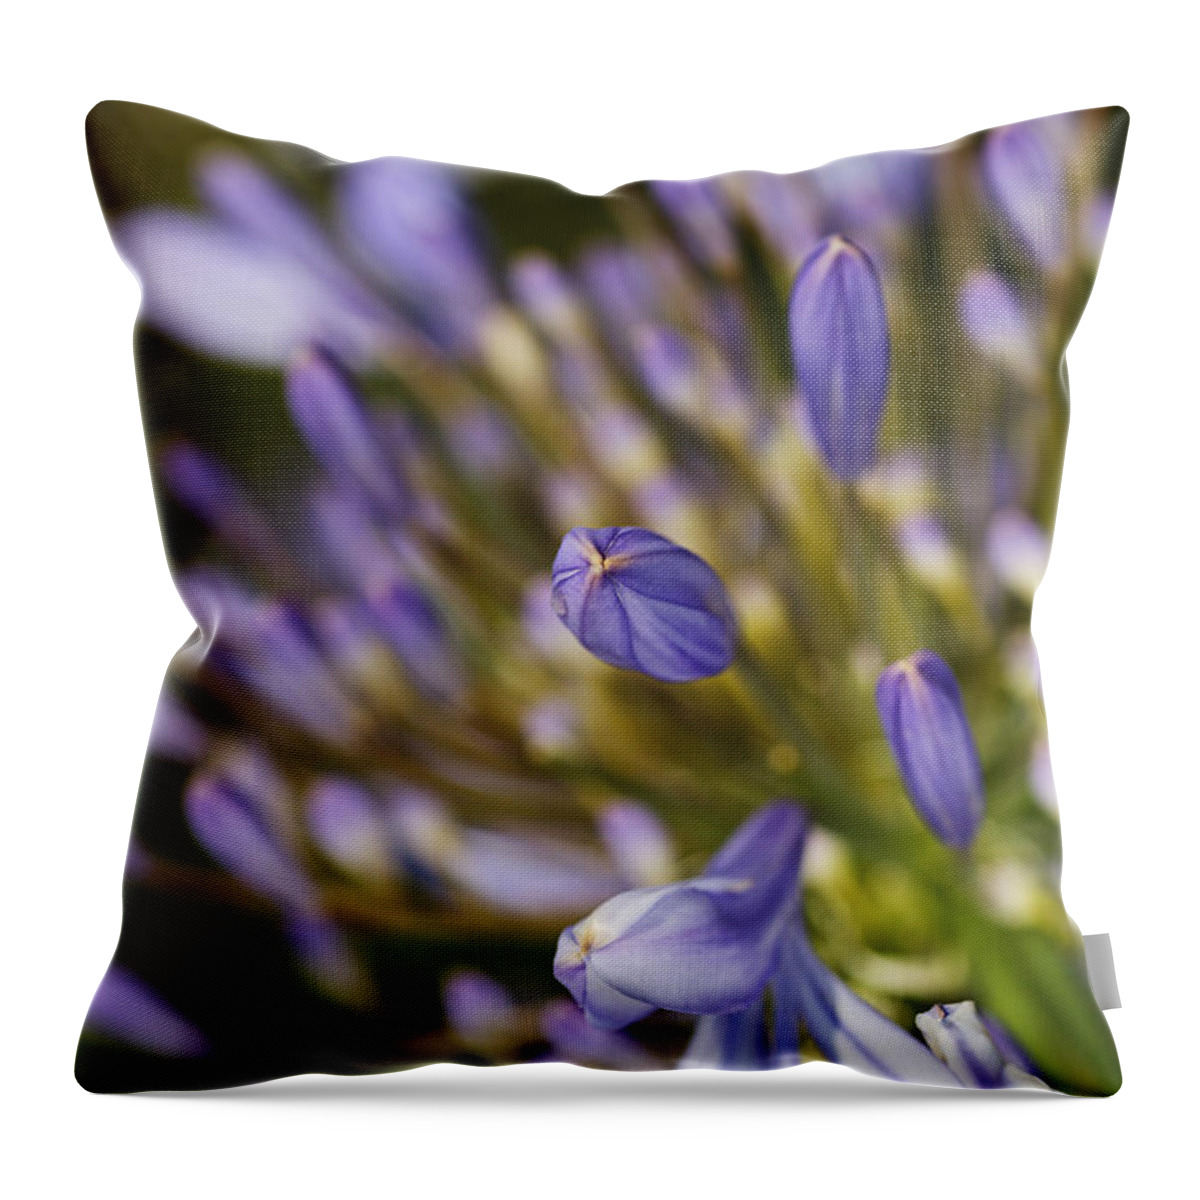 Lily Of The Nile Throw Pillow featuring the photograph Agapanthus Buds To Flower by Joy Watson